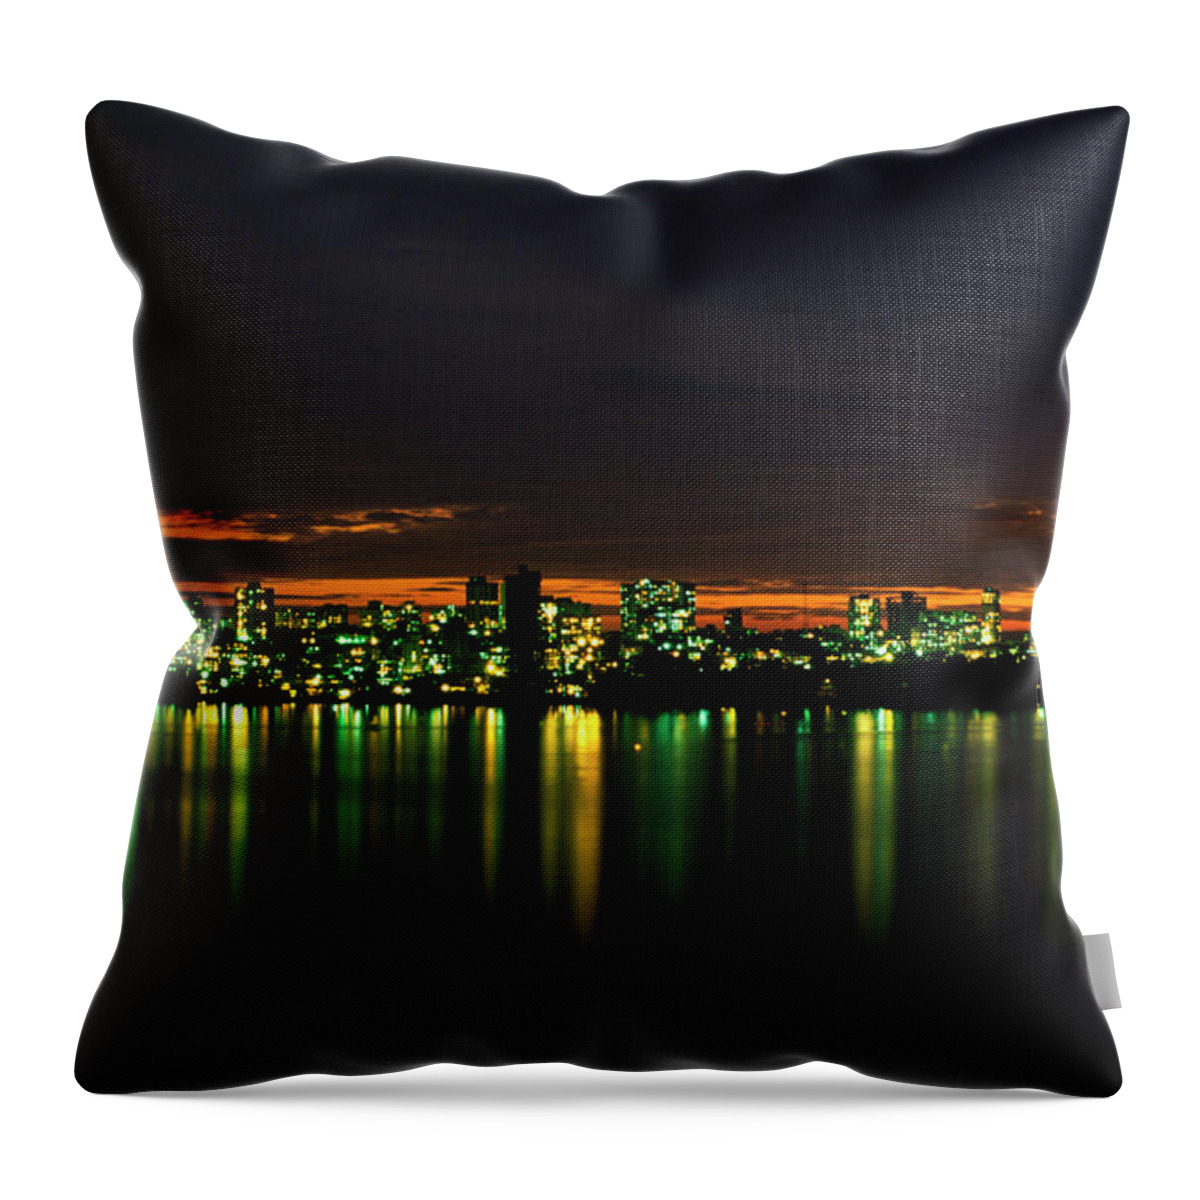 Corporate Business Throw Pillow featuring the photograph Mumbai At Night by Ooyoo